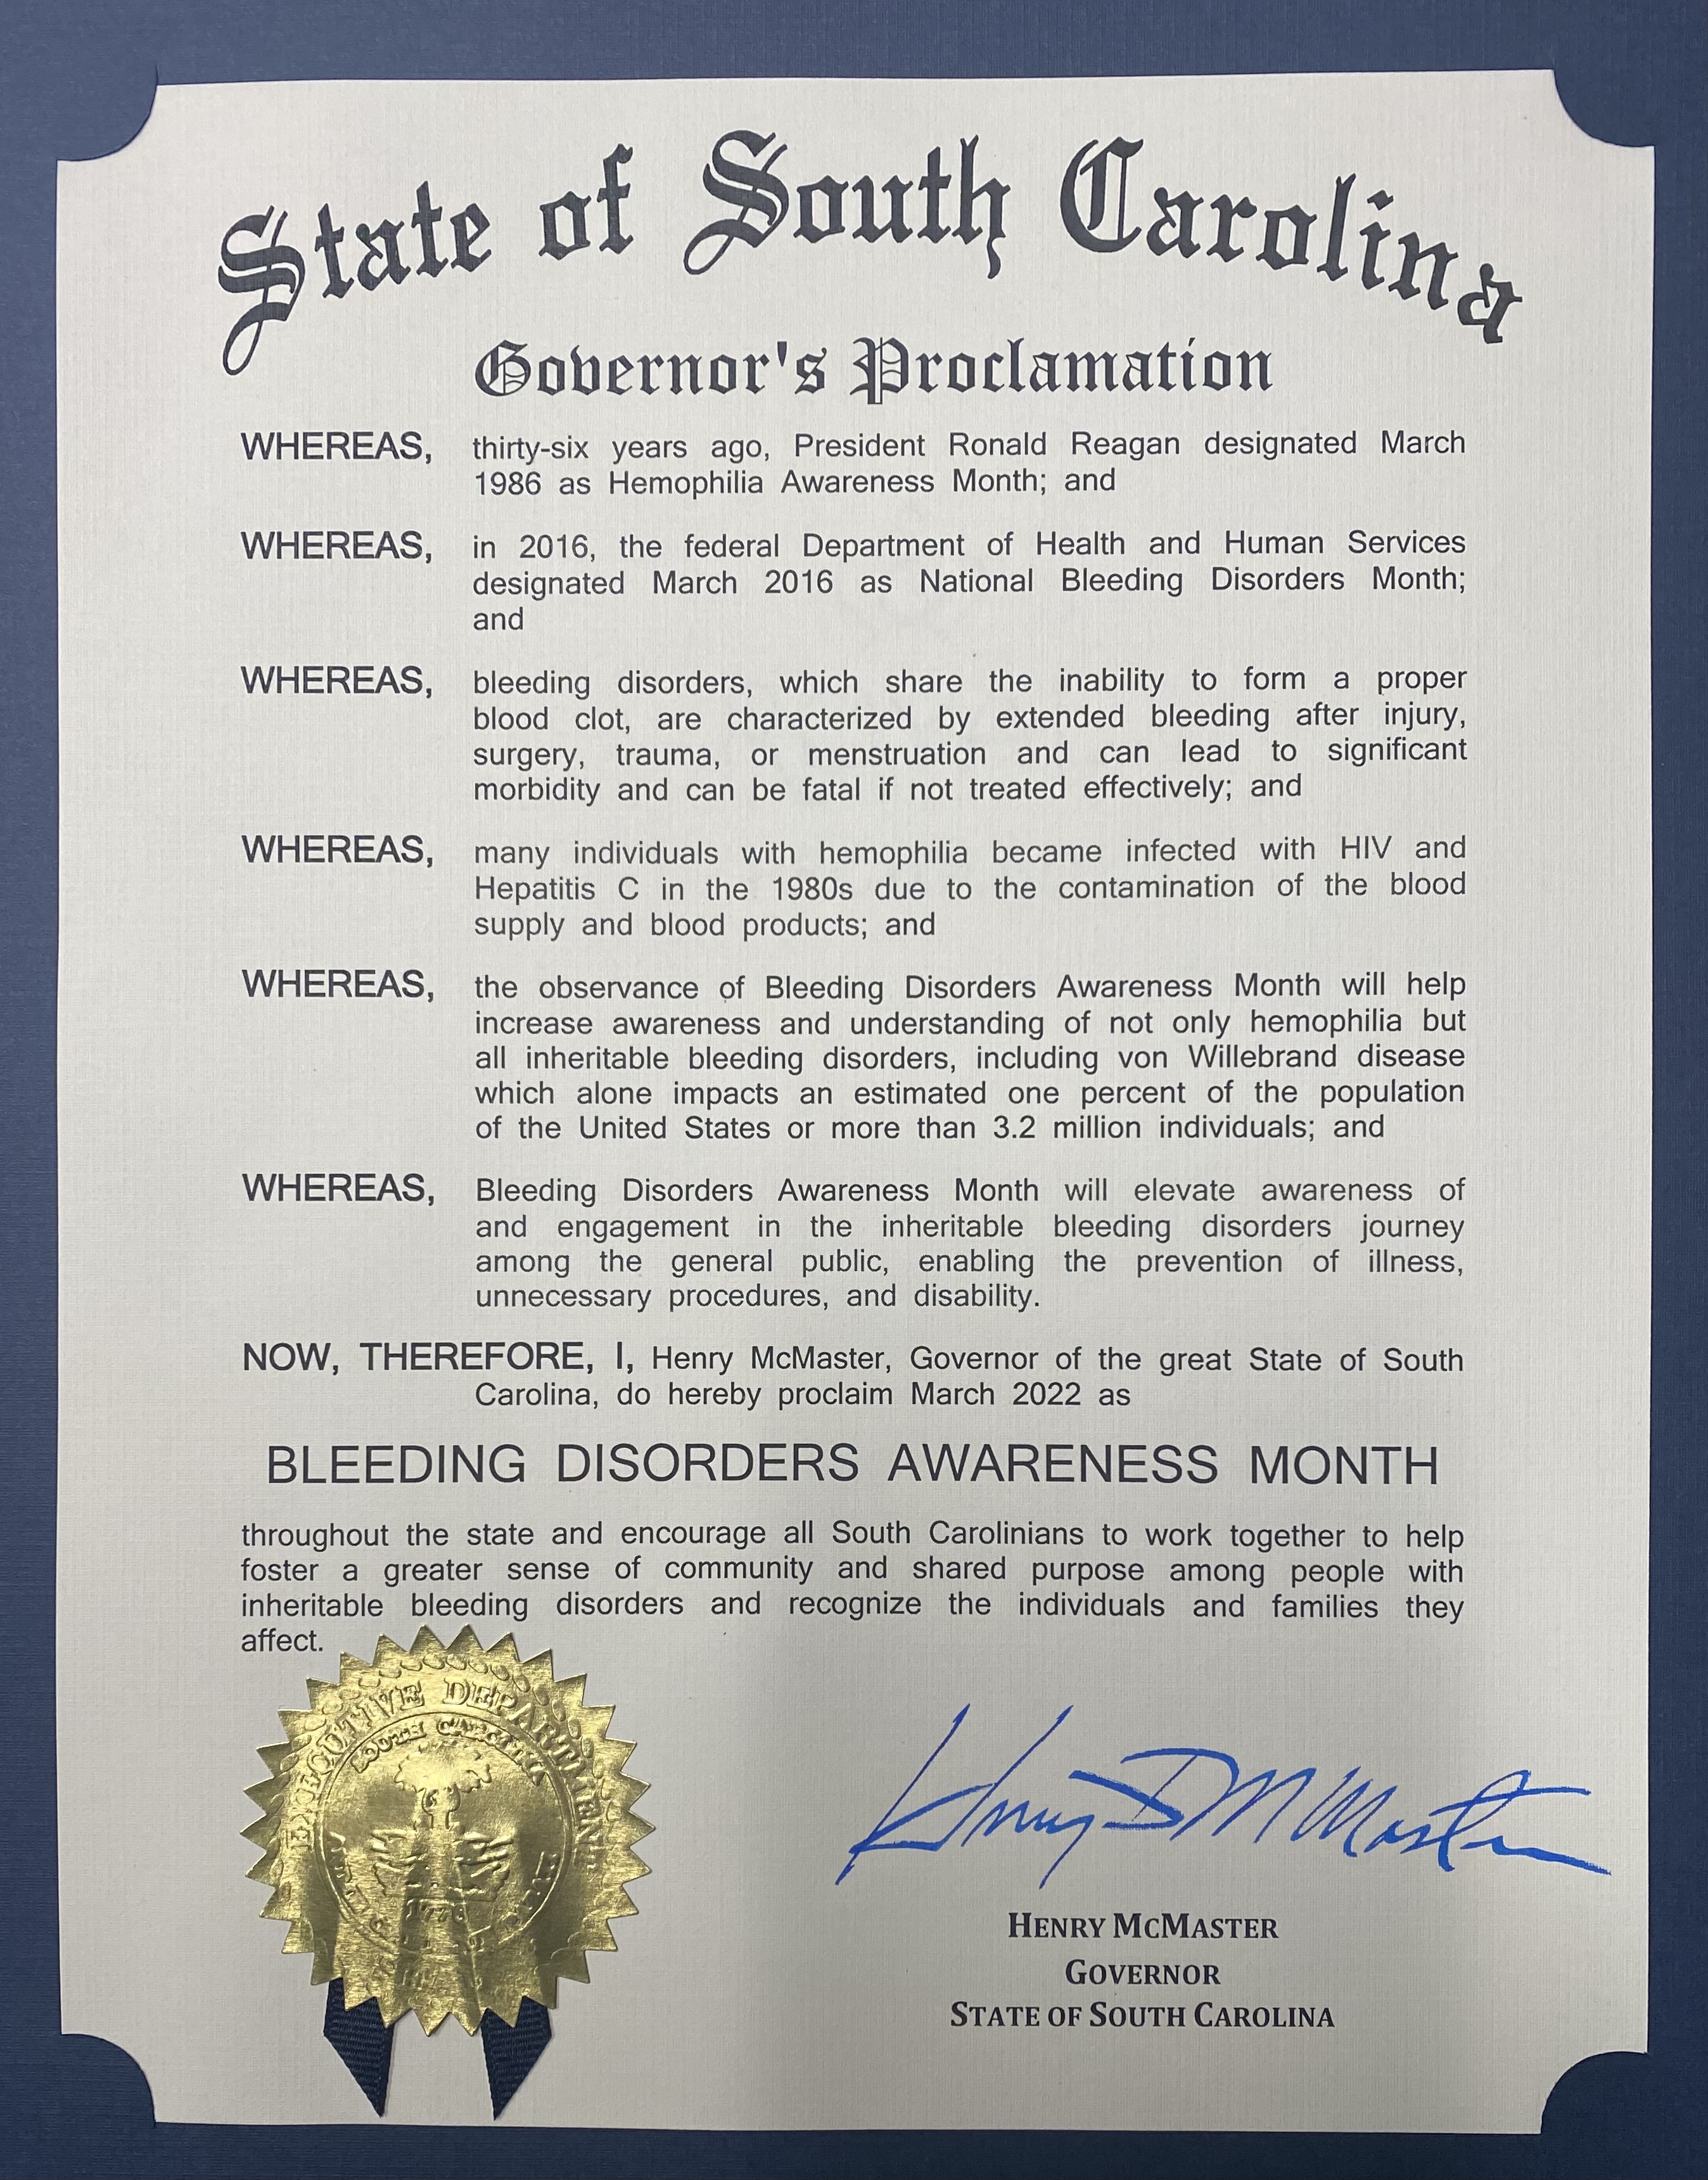 Our 2022 State of South Carolina Bleeding Disorder Awareness Month Proclamation